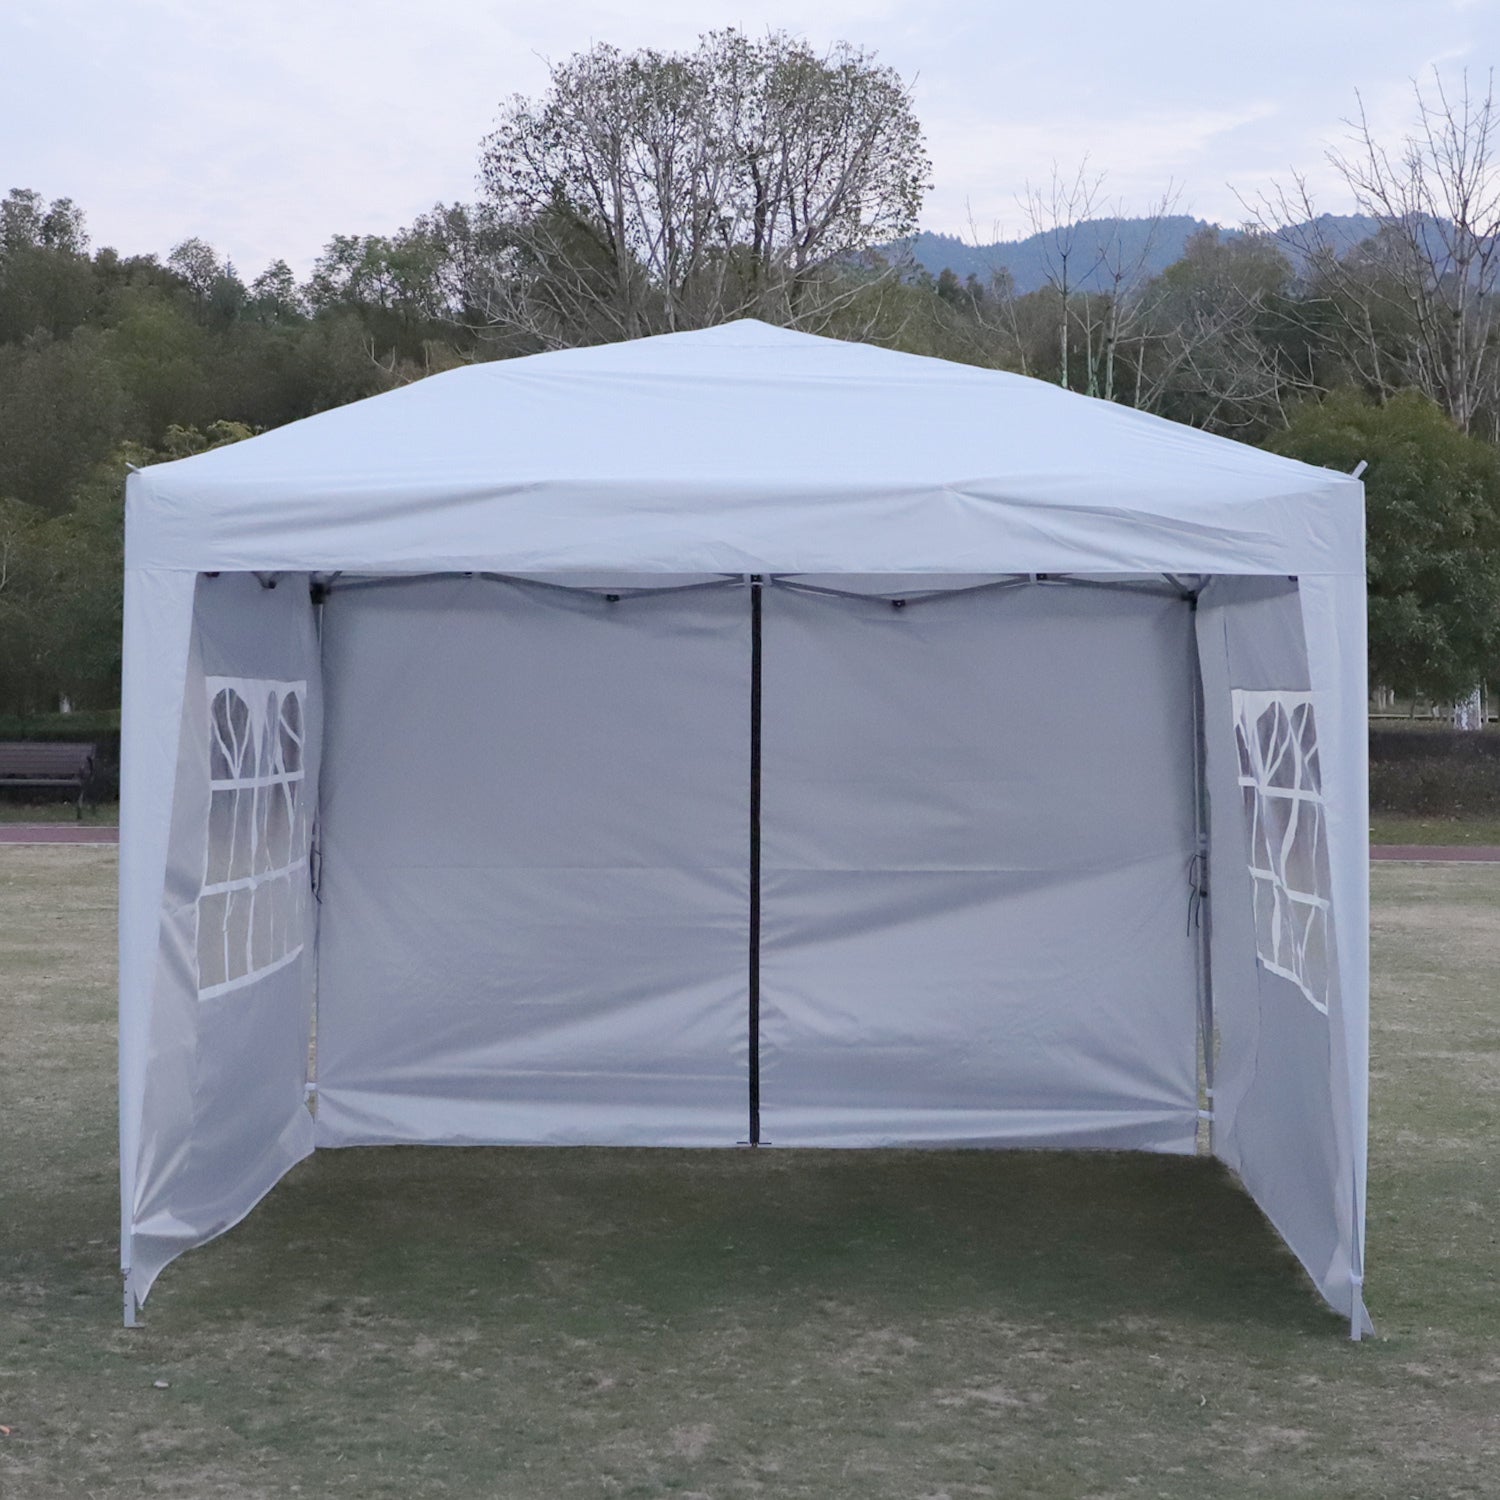 Outdoor 10x 10Ft Pop Up Gazebo Canopy Tent Removable white-metal